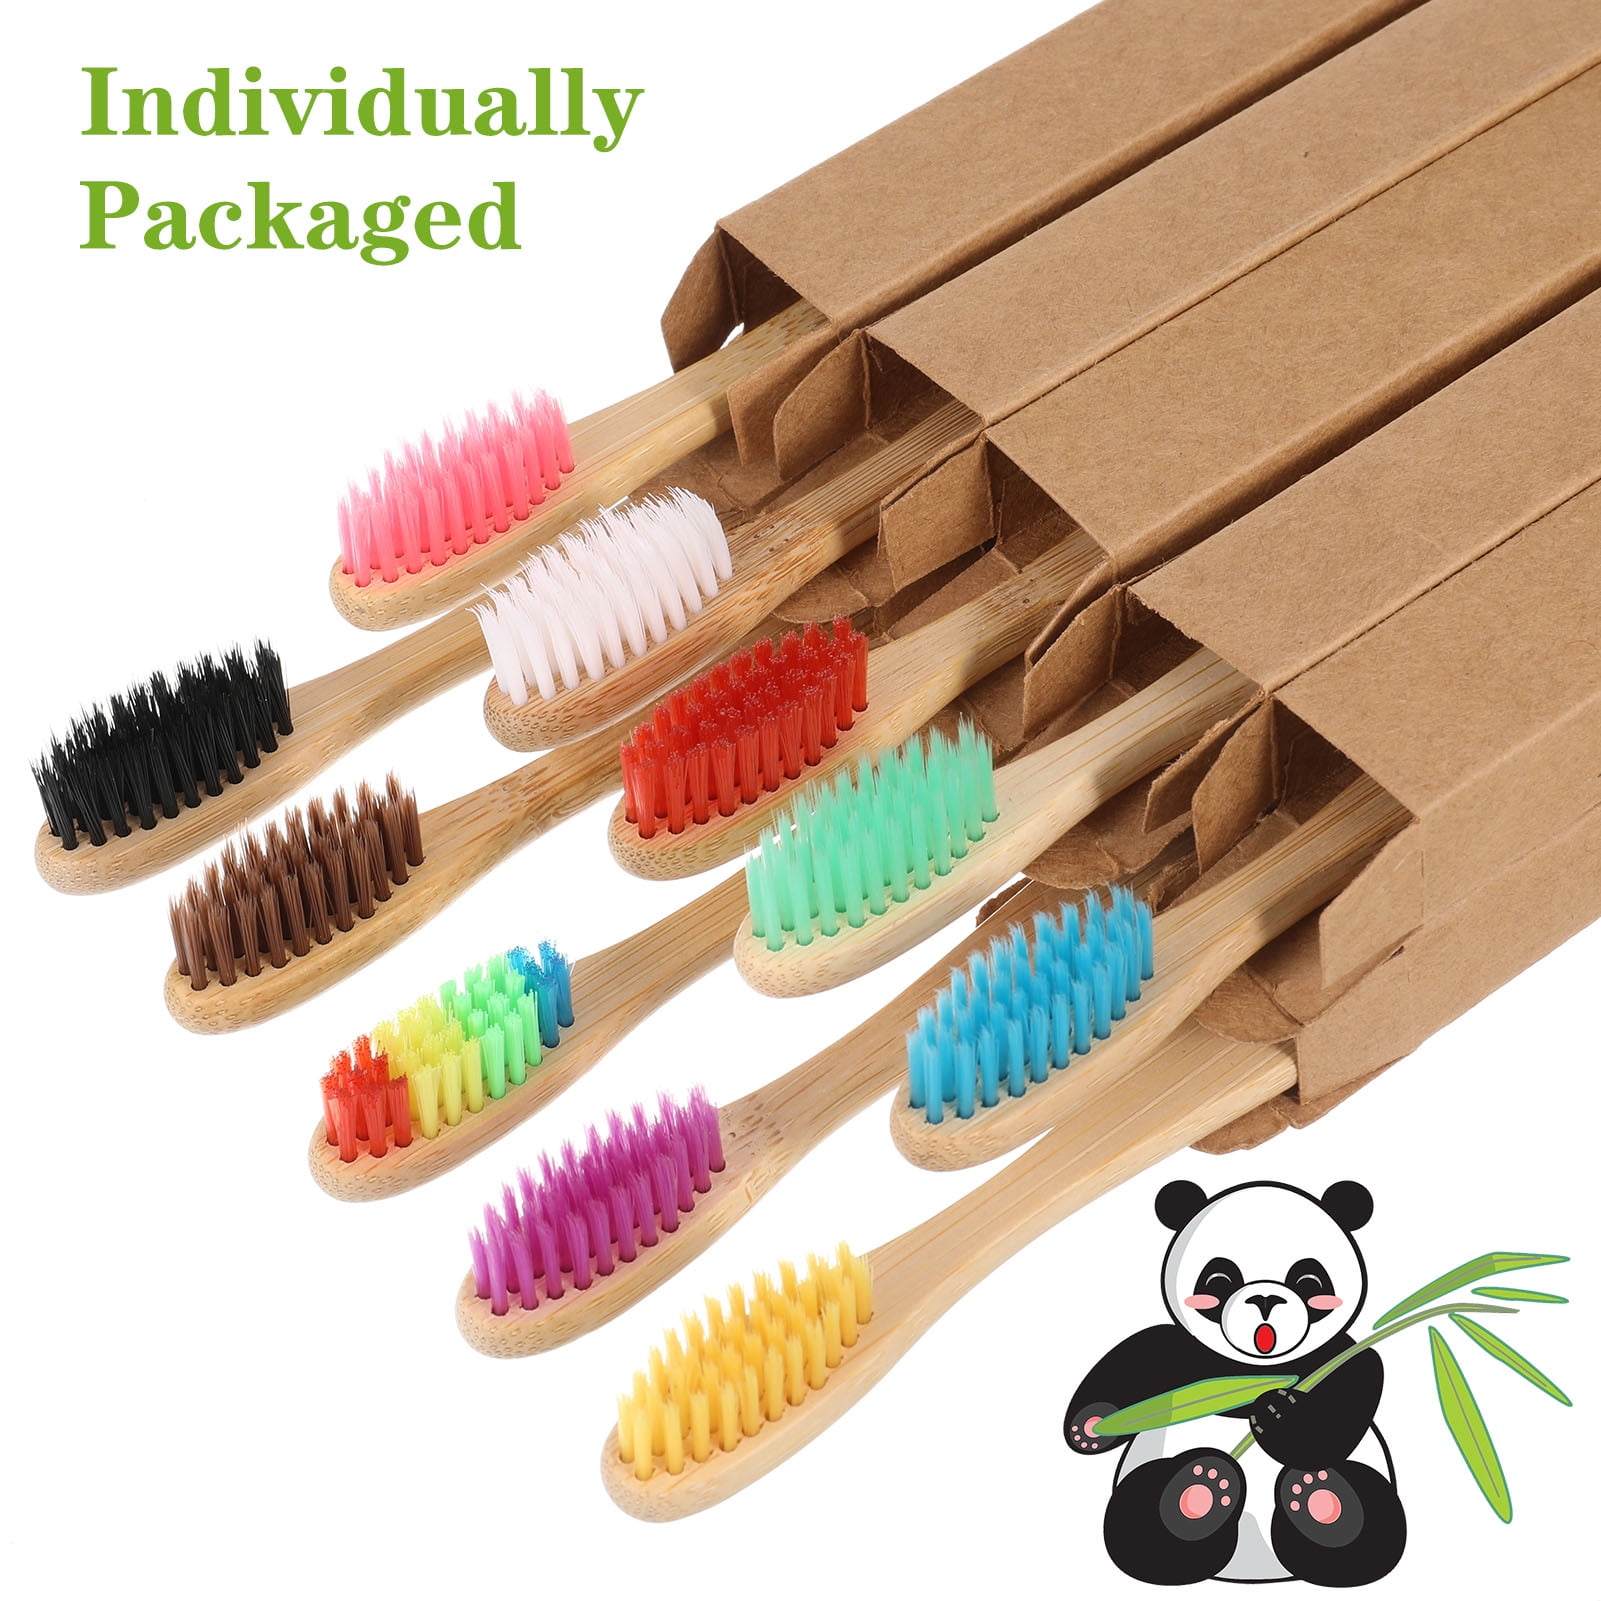 Eco Friendly Travel Kit for Single Person (Unisex)  1 Bamboo Toothbrush +  1 small pack of Bamboo Earbuds + 1 Bamboo Face Towel + 1 small toothpaste +  1 Neem Wood